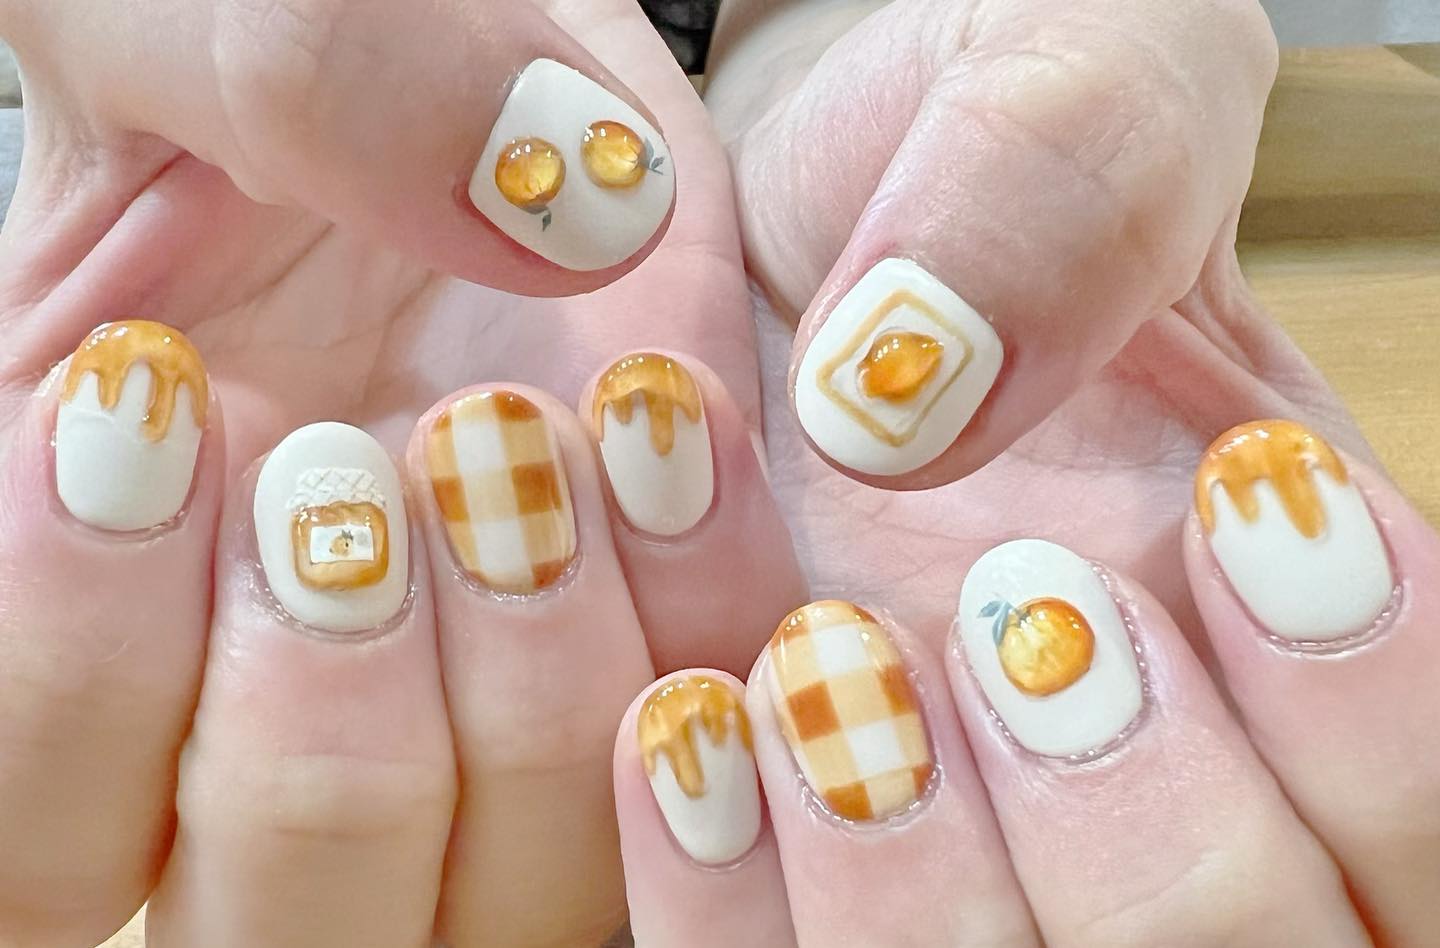 Who doesn't love breakfast? And who wouldn't want to wear a magical little piece of it on their fingers? Paint your nails with honey, bread and orange jam.